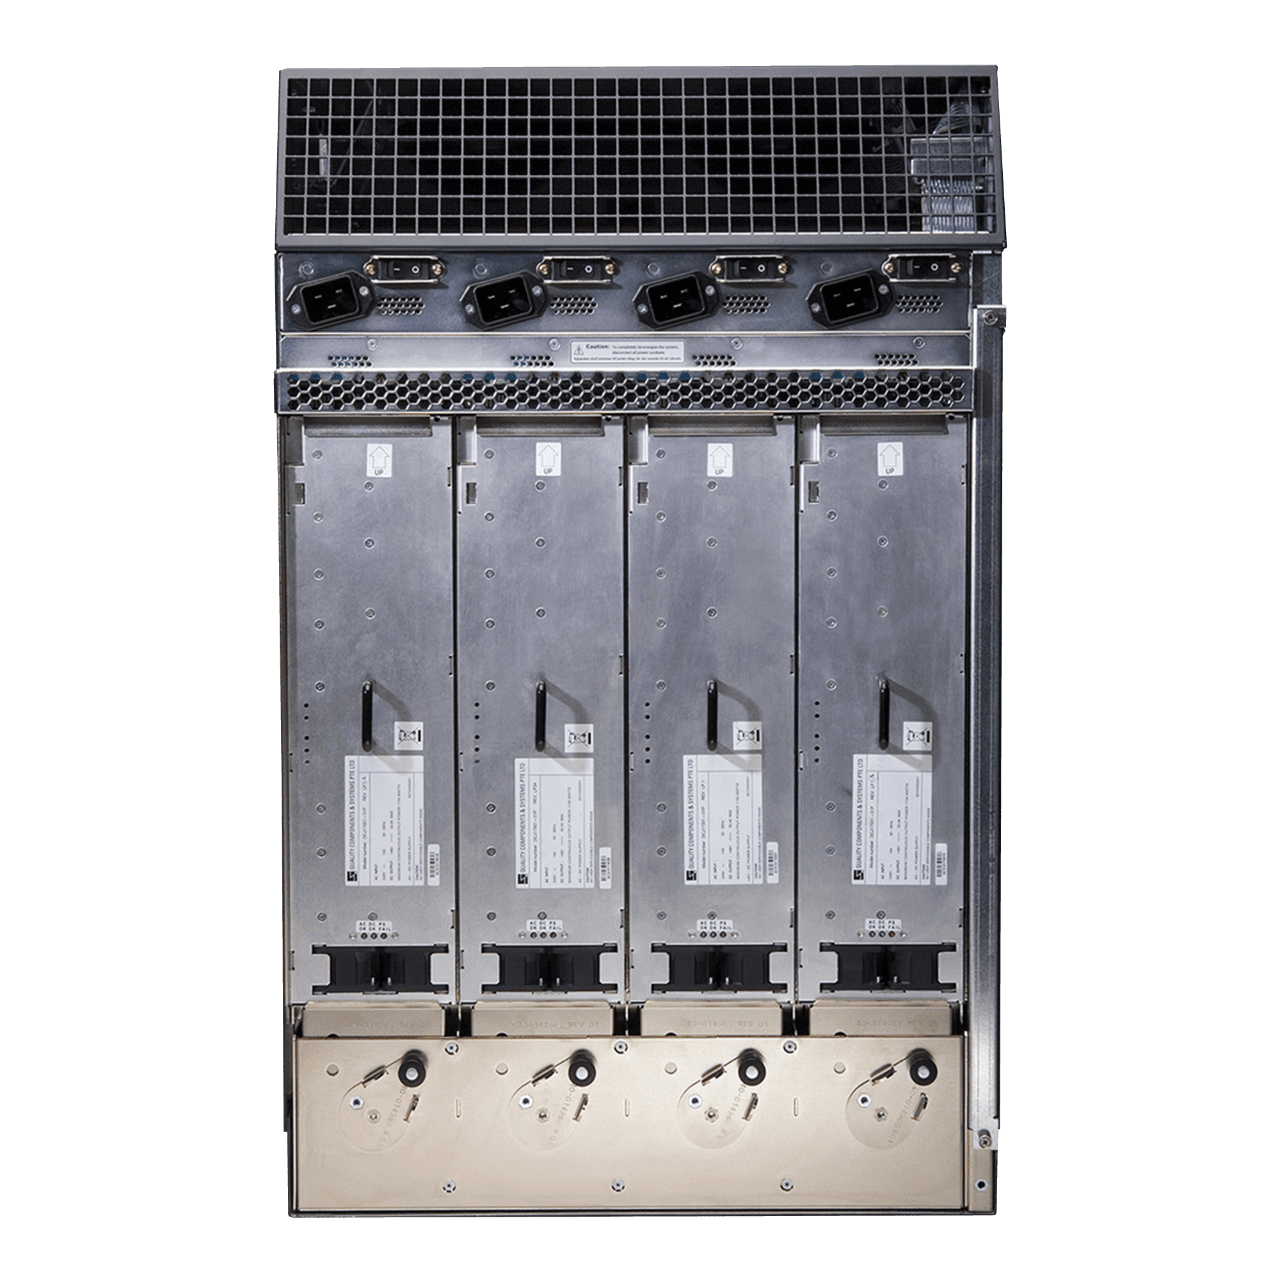 MX Series Routers  Juniper Networks US